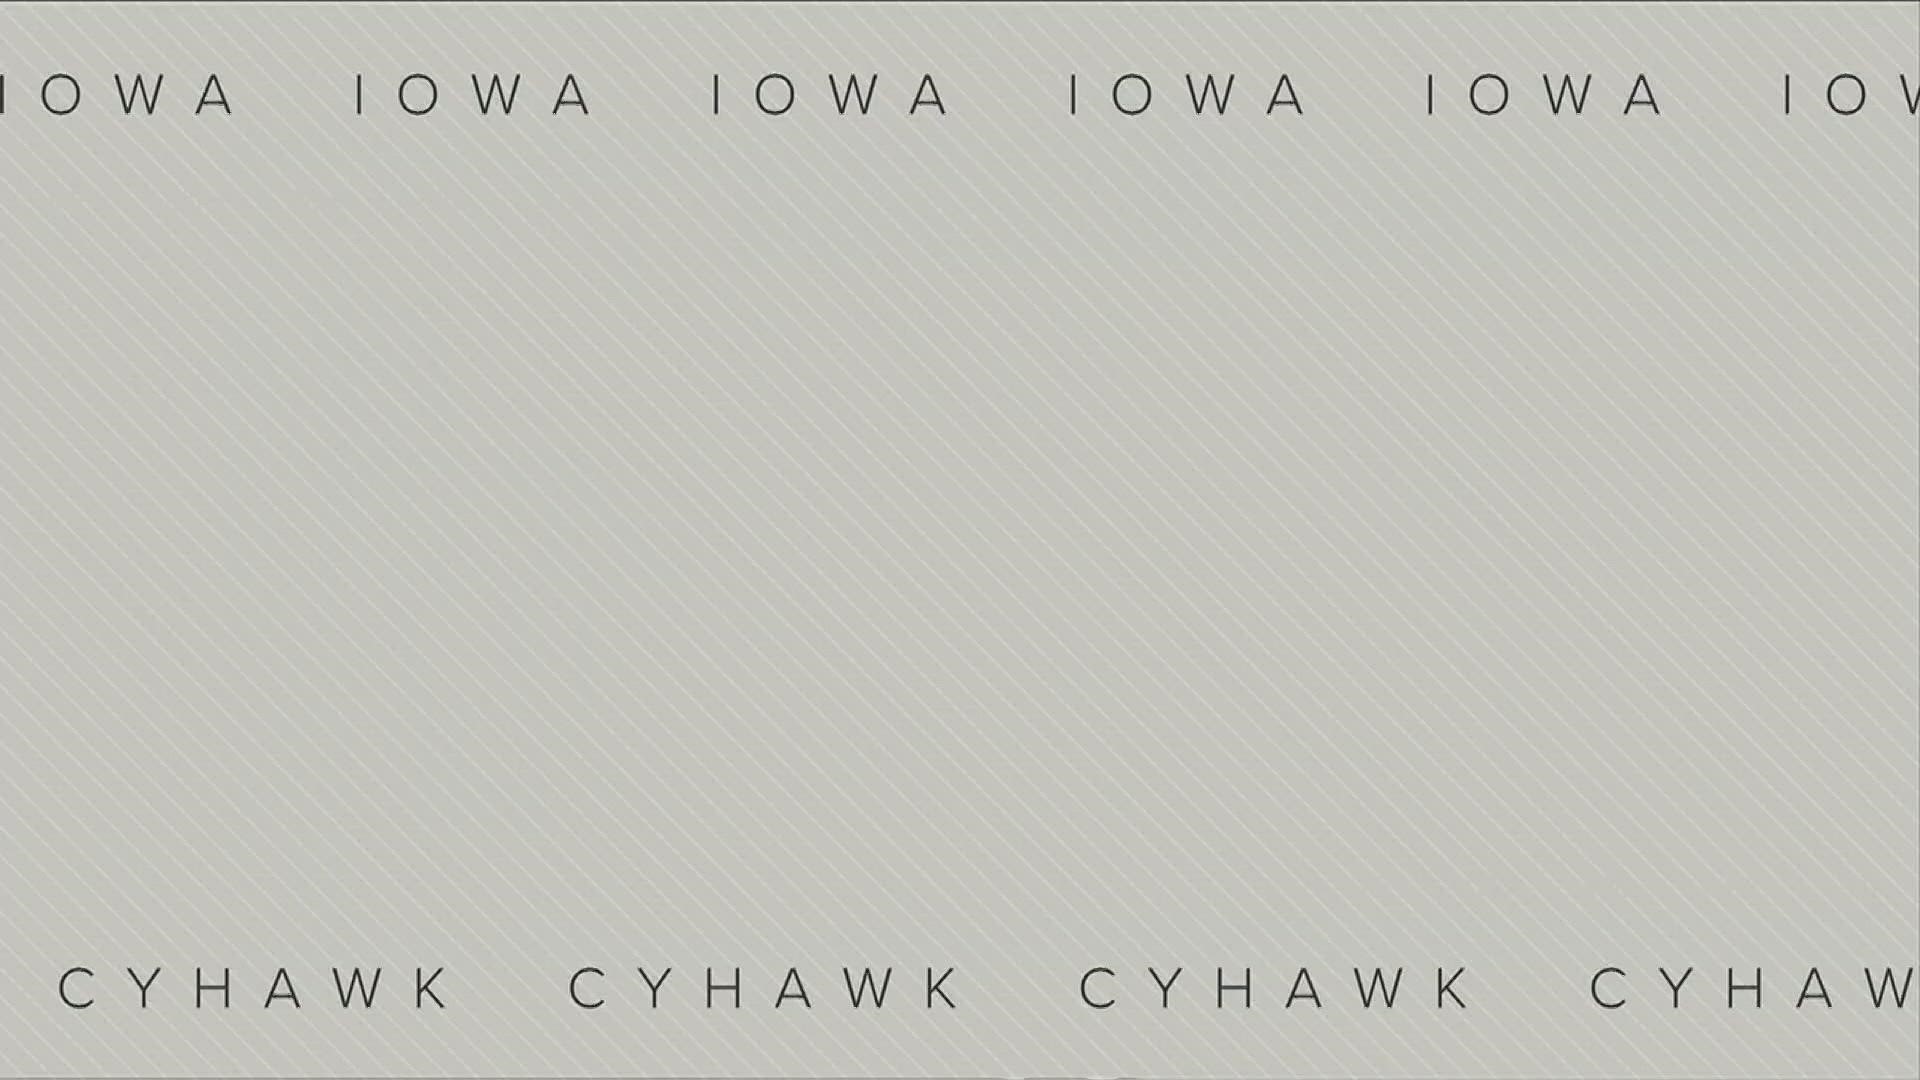 Local 5's CyHawk Gameday gets you ready for Iowa State vs. K-State and Iowa at Penn State with analysis, whiteboard breakdown and more